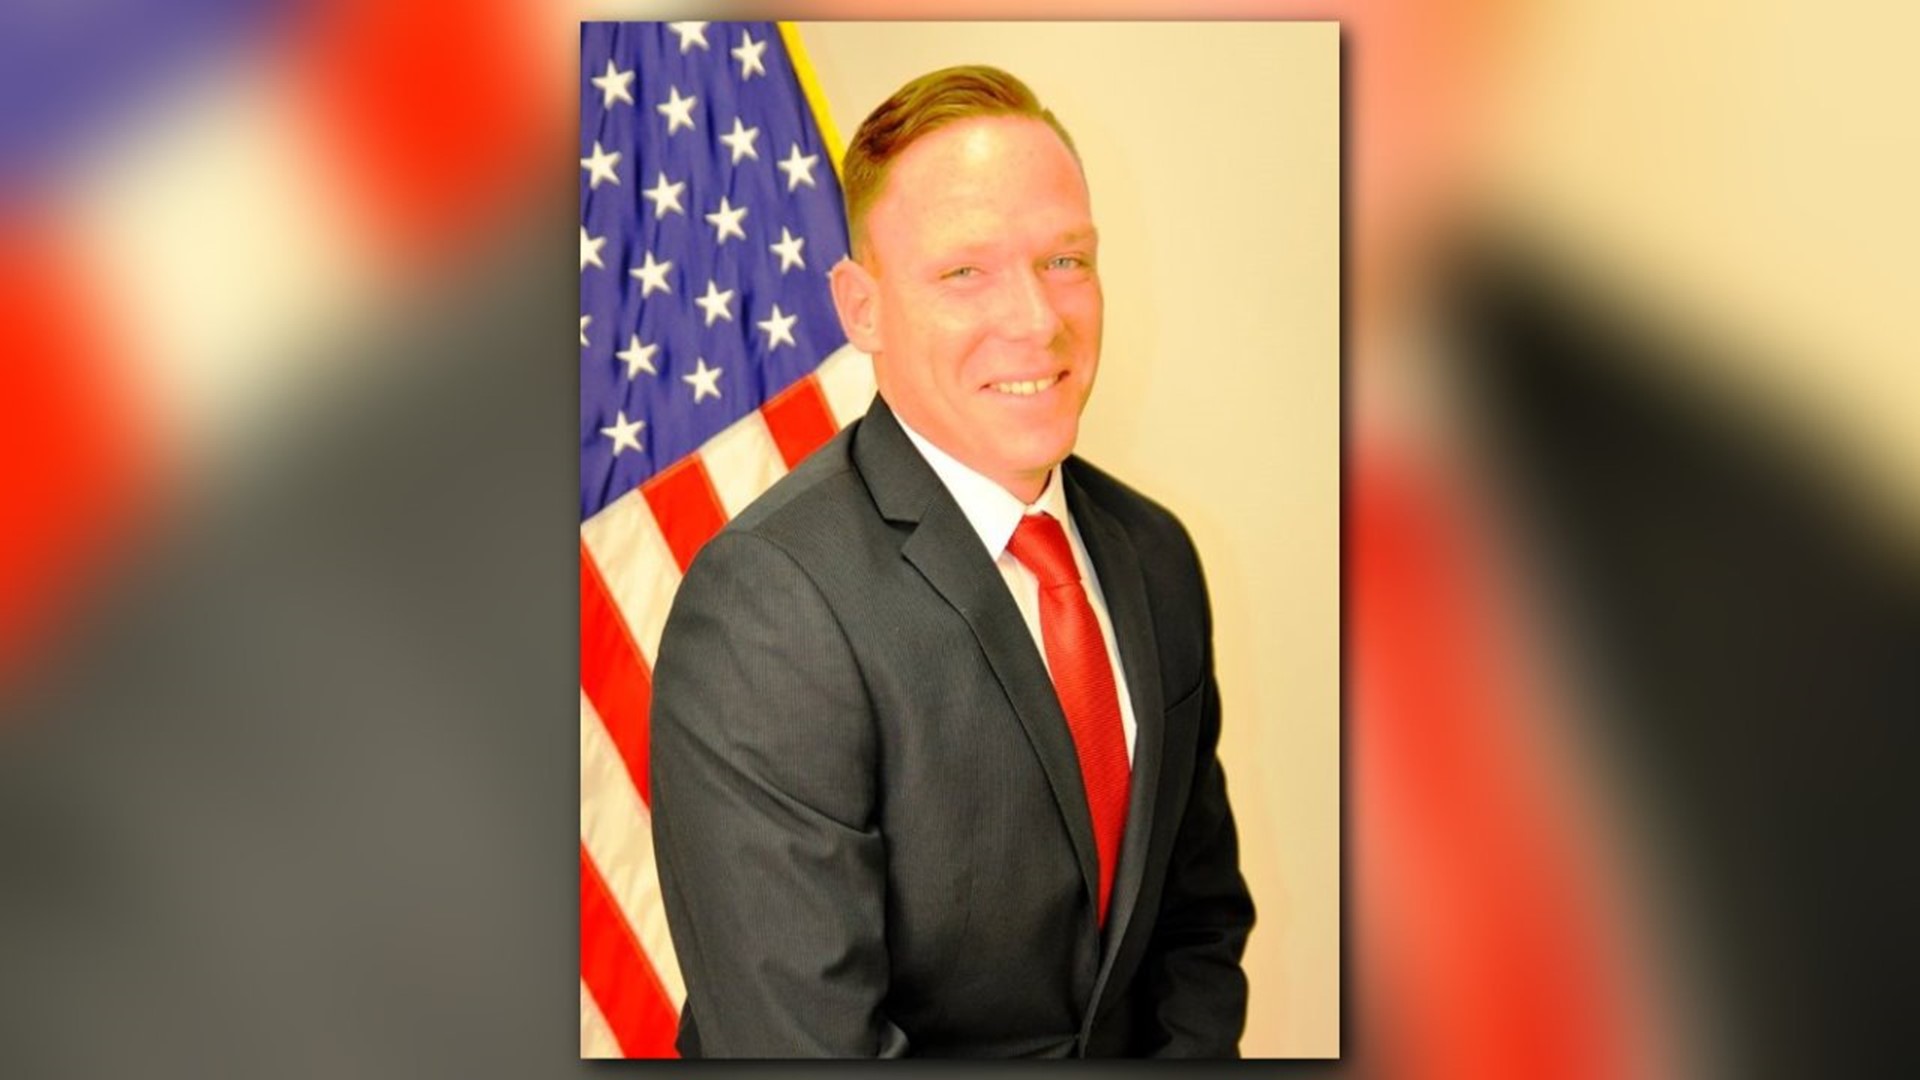 Today marks one year since a deadly ambush in York County when Detective Mike Doty was killed and three other officers were hurt.